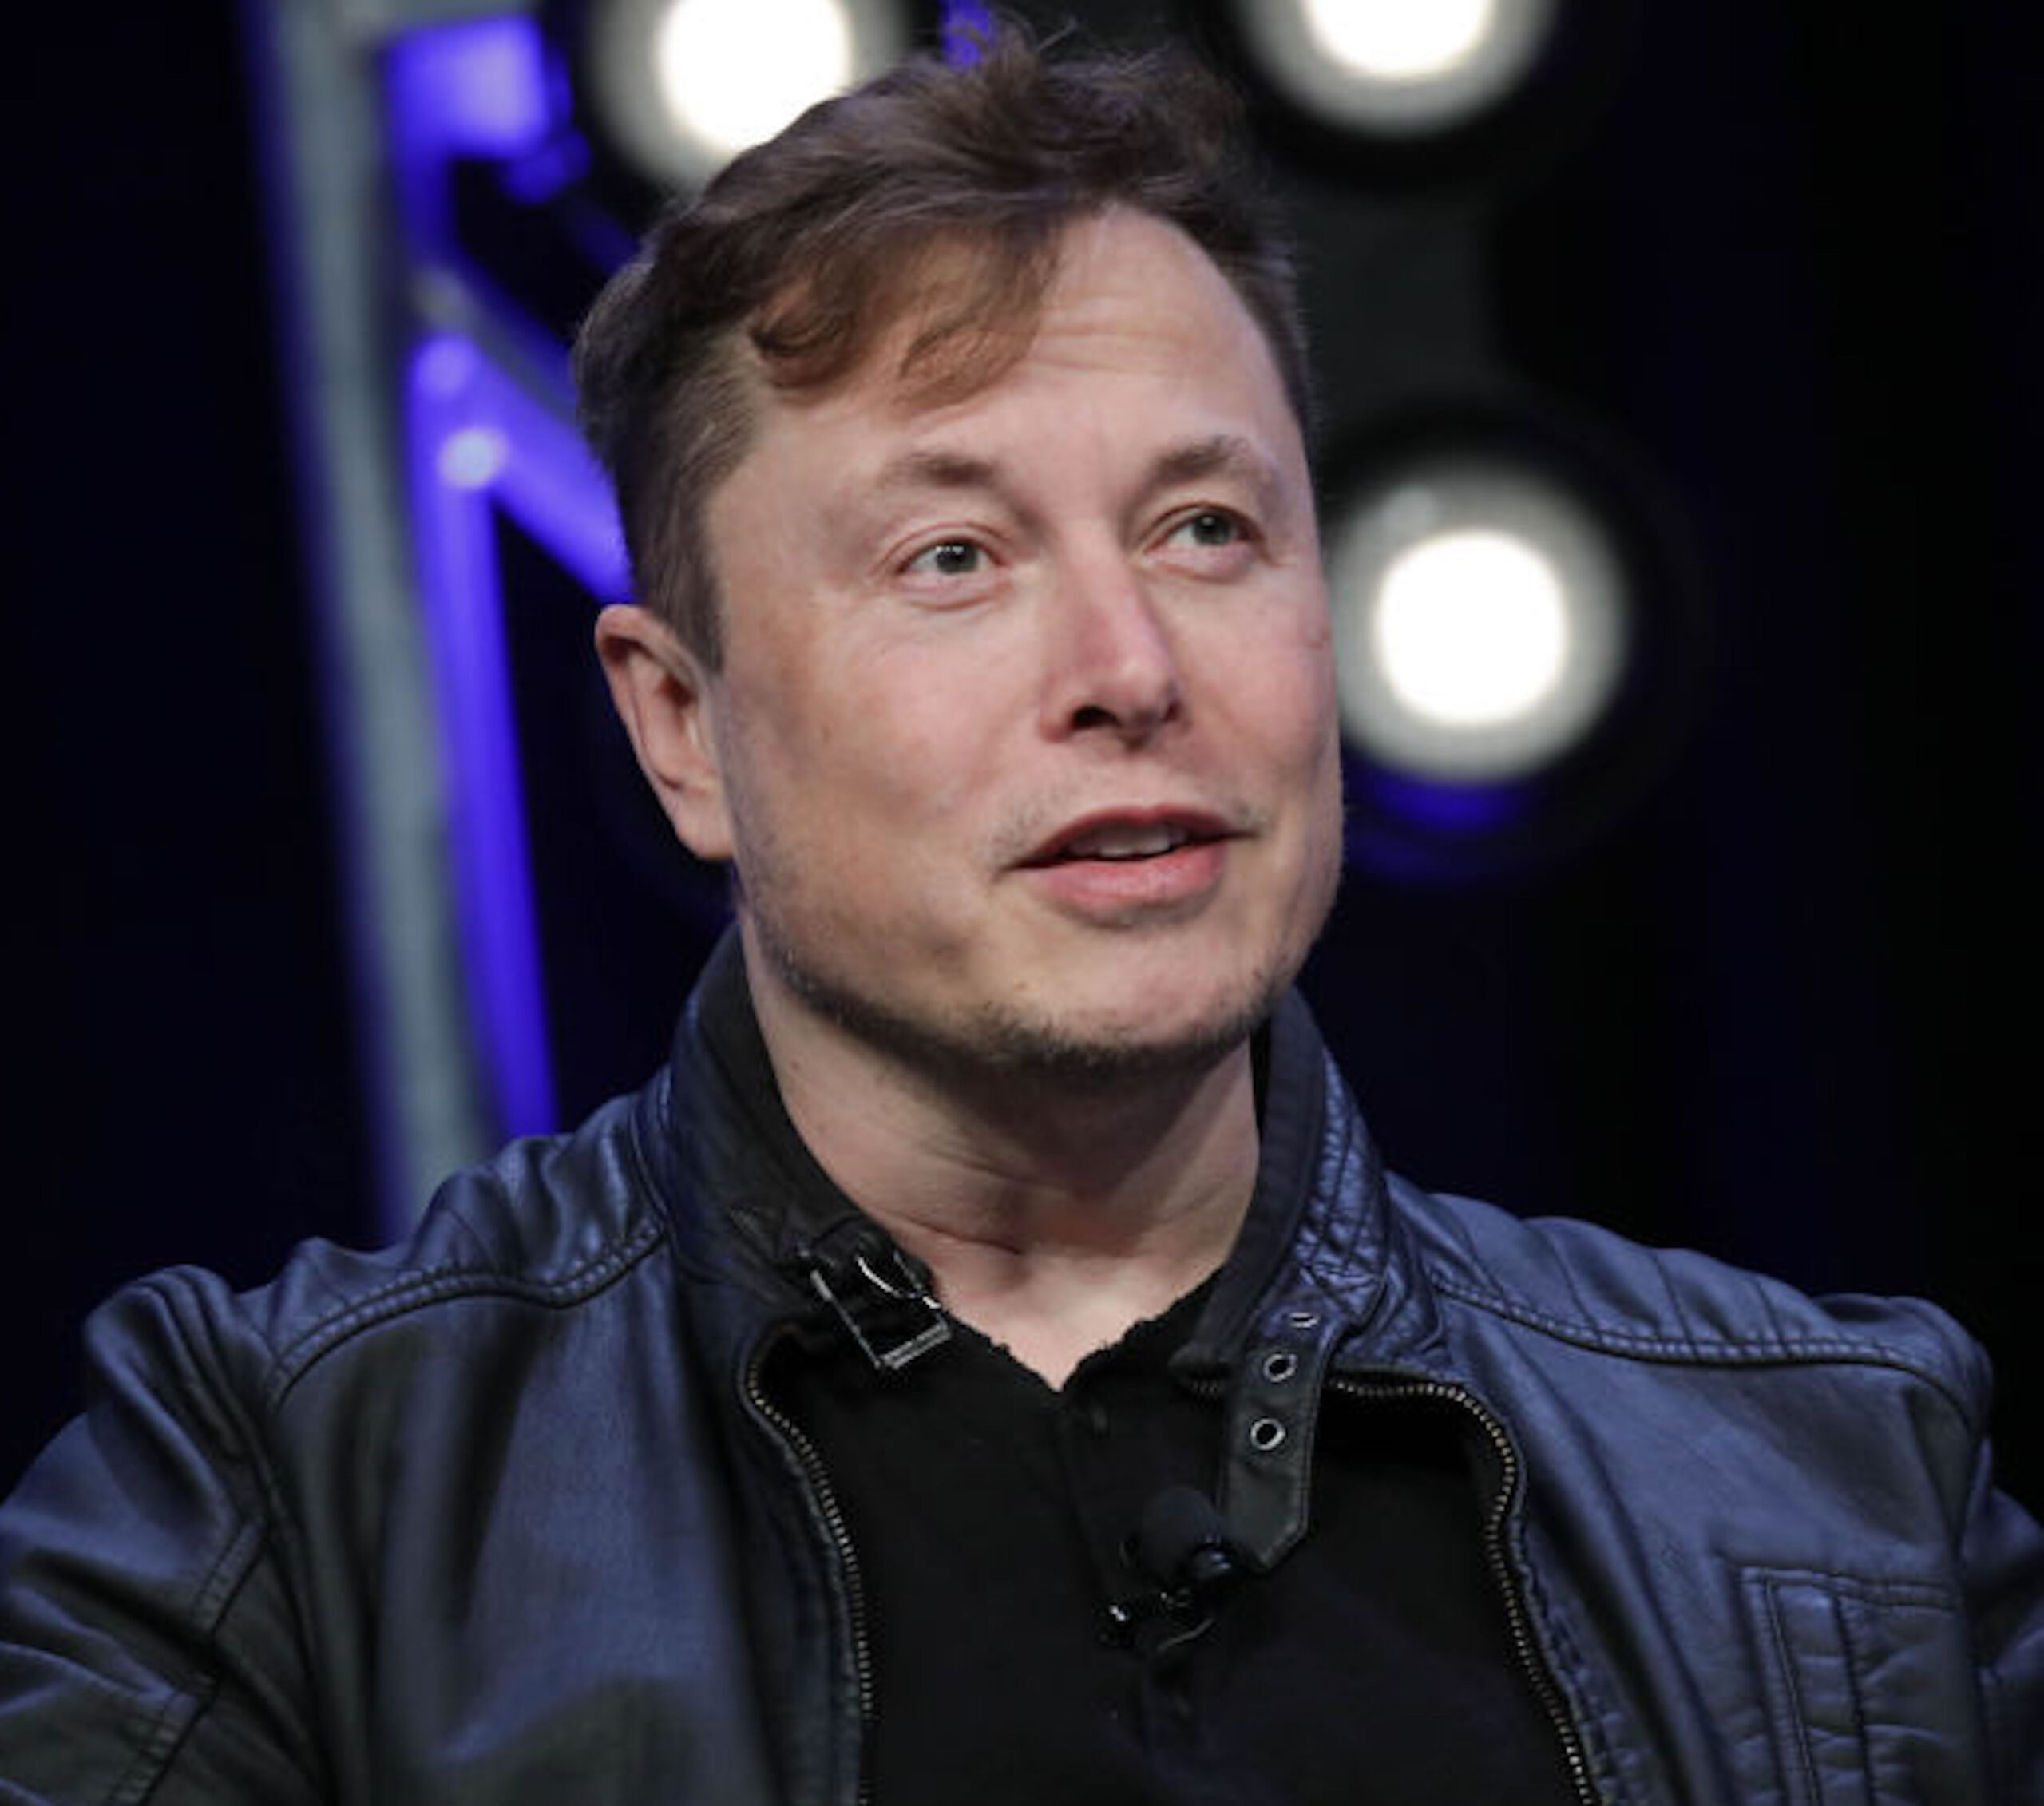 Clinton-Era Economist Accuses Musk Of Shorting Tesla Workers, Cites Stock Performance; Musk Responds